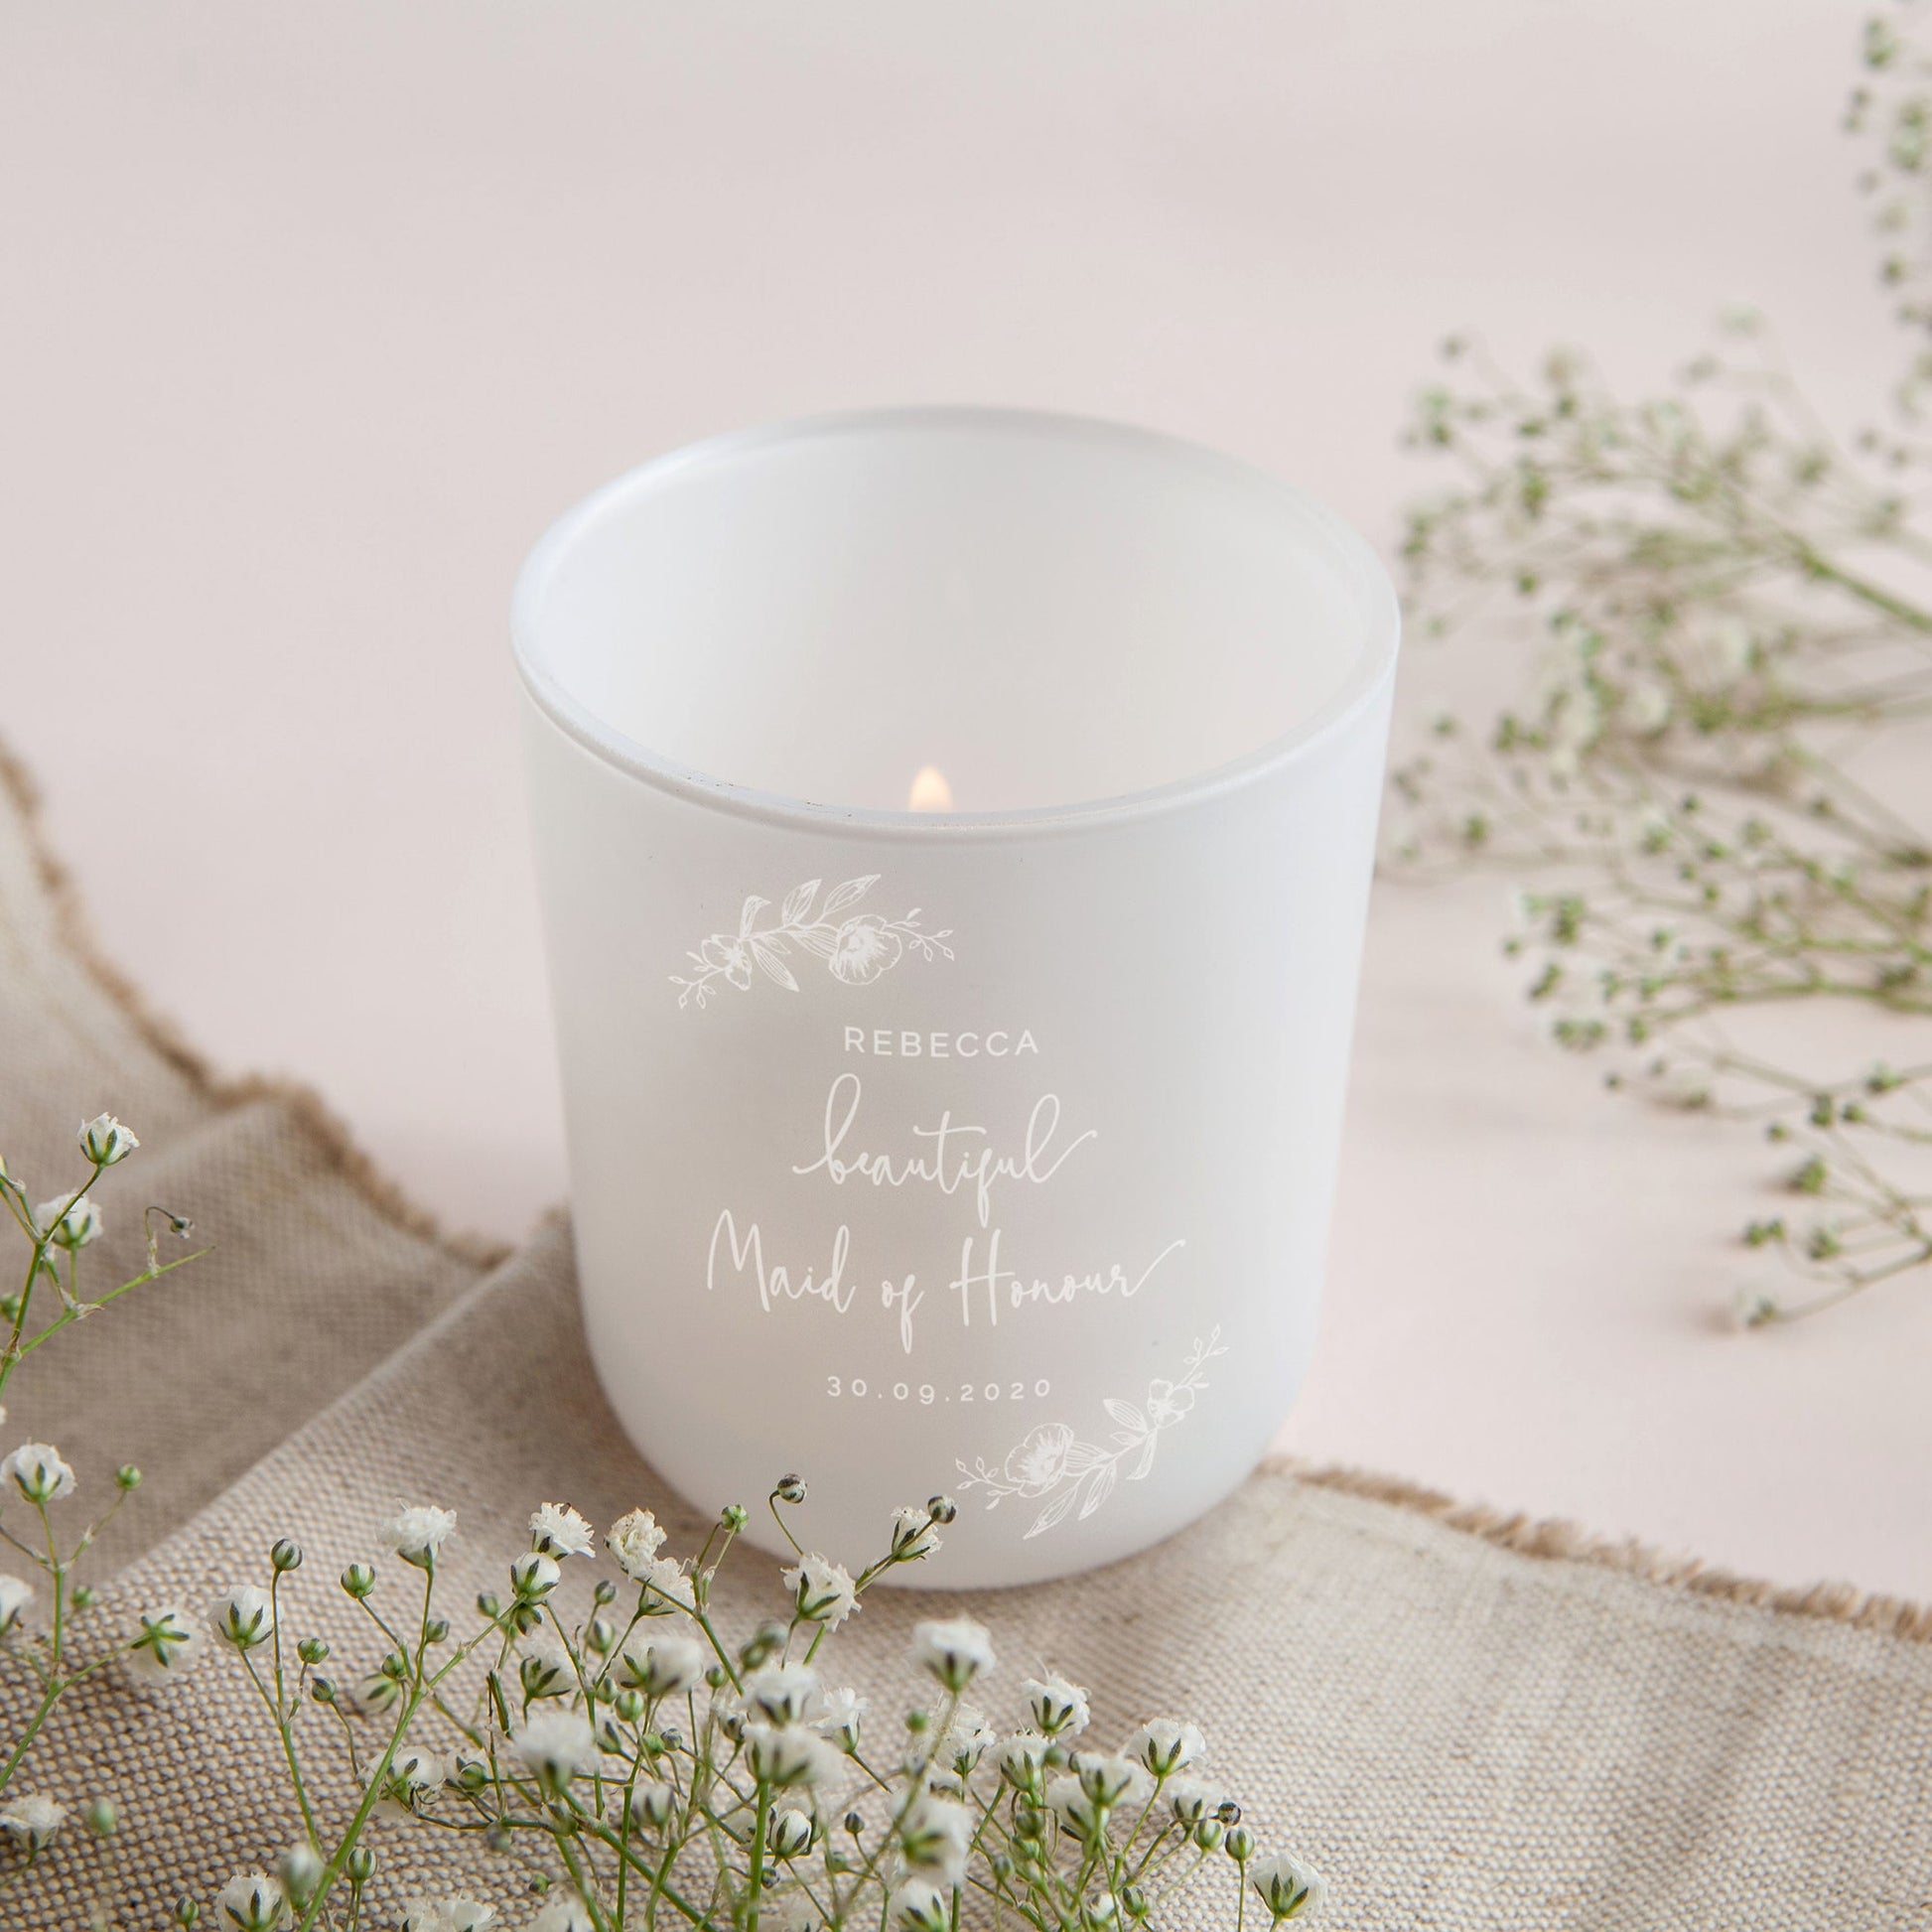 Maid of Honour Gift Tealight Holder with Candles - Kindred Fires